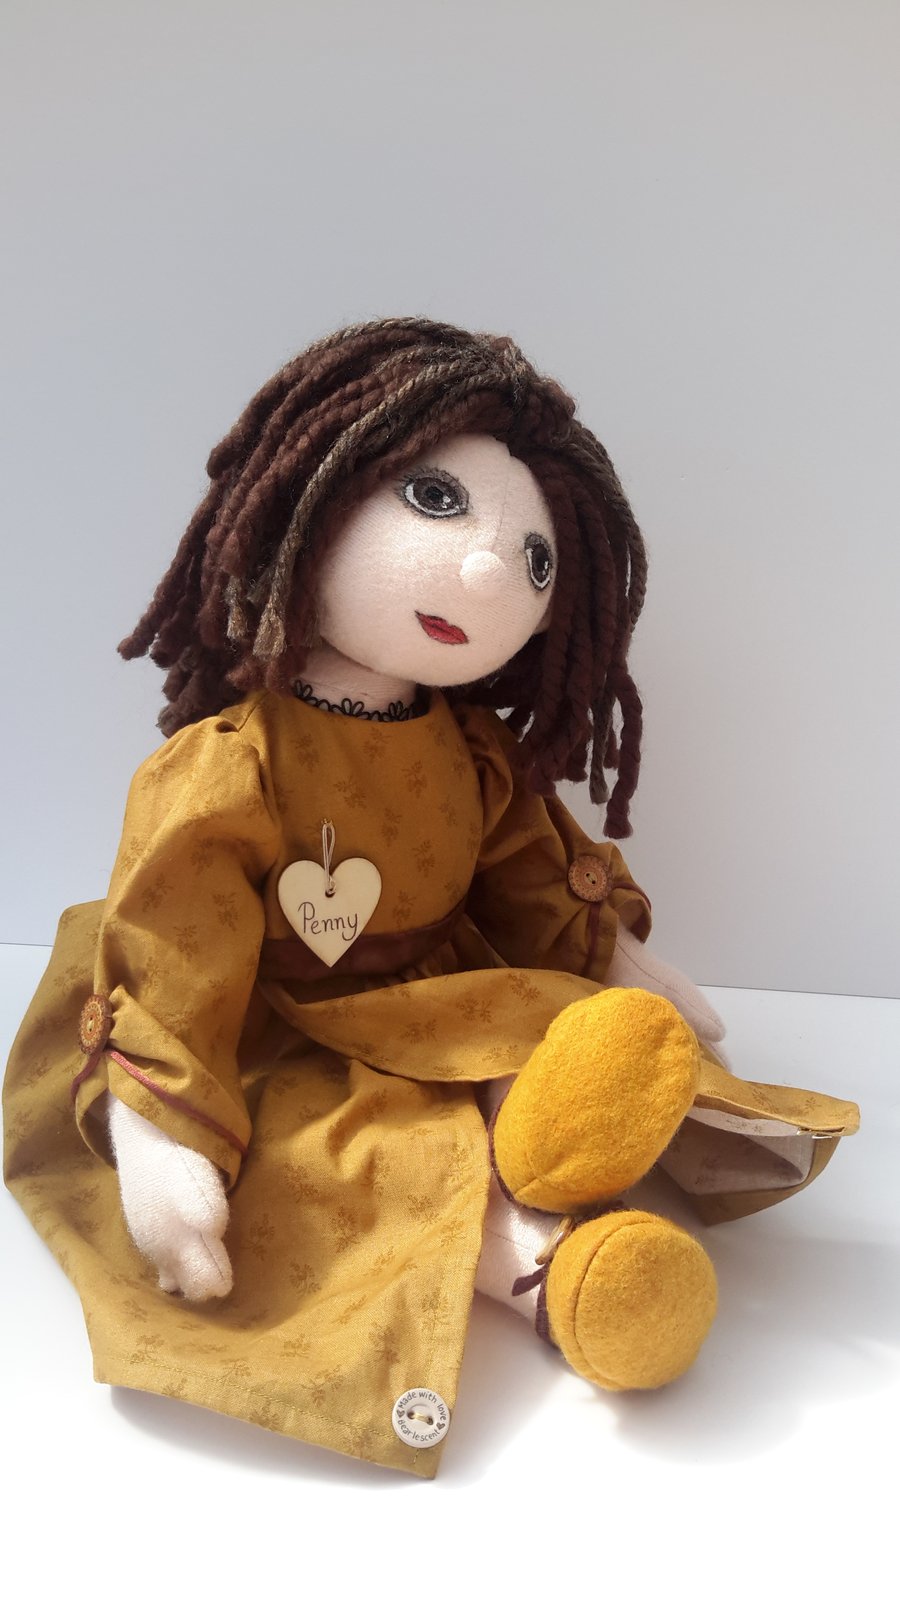 Penny, 21" Cloth Doll, Dressed Rag Doll, Adult Collectable Art Doll 